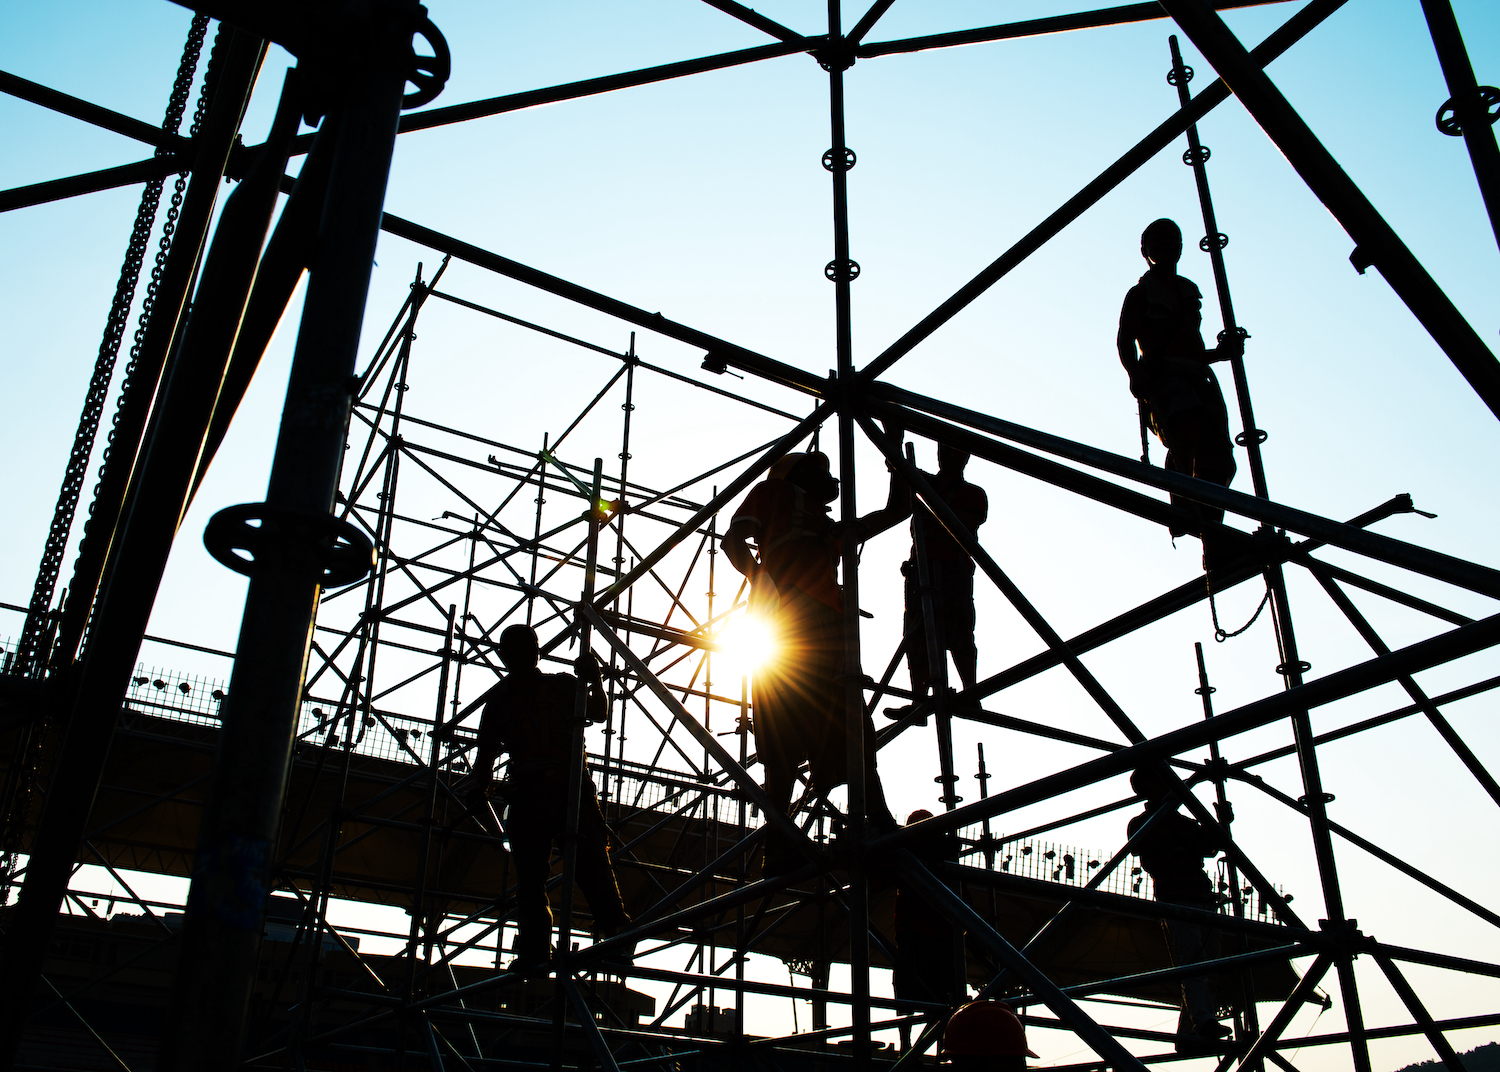 Construction workers stand high up on scaffolding on a construction site